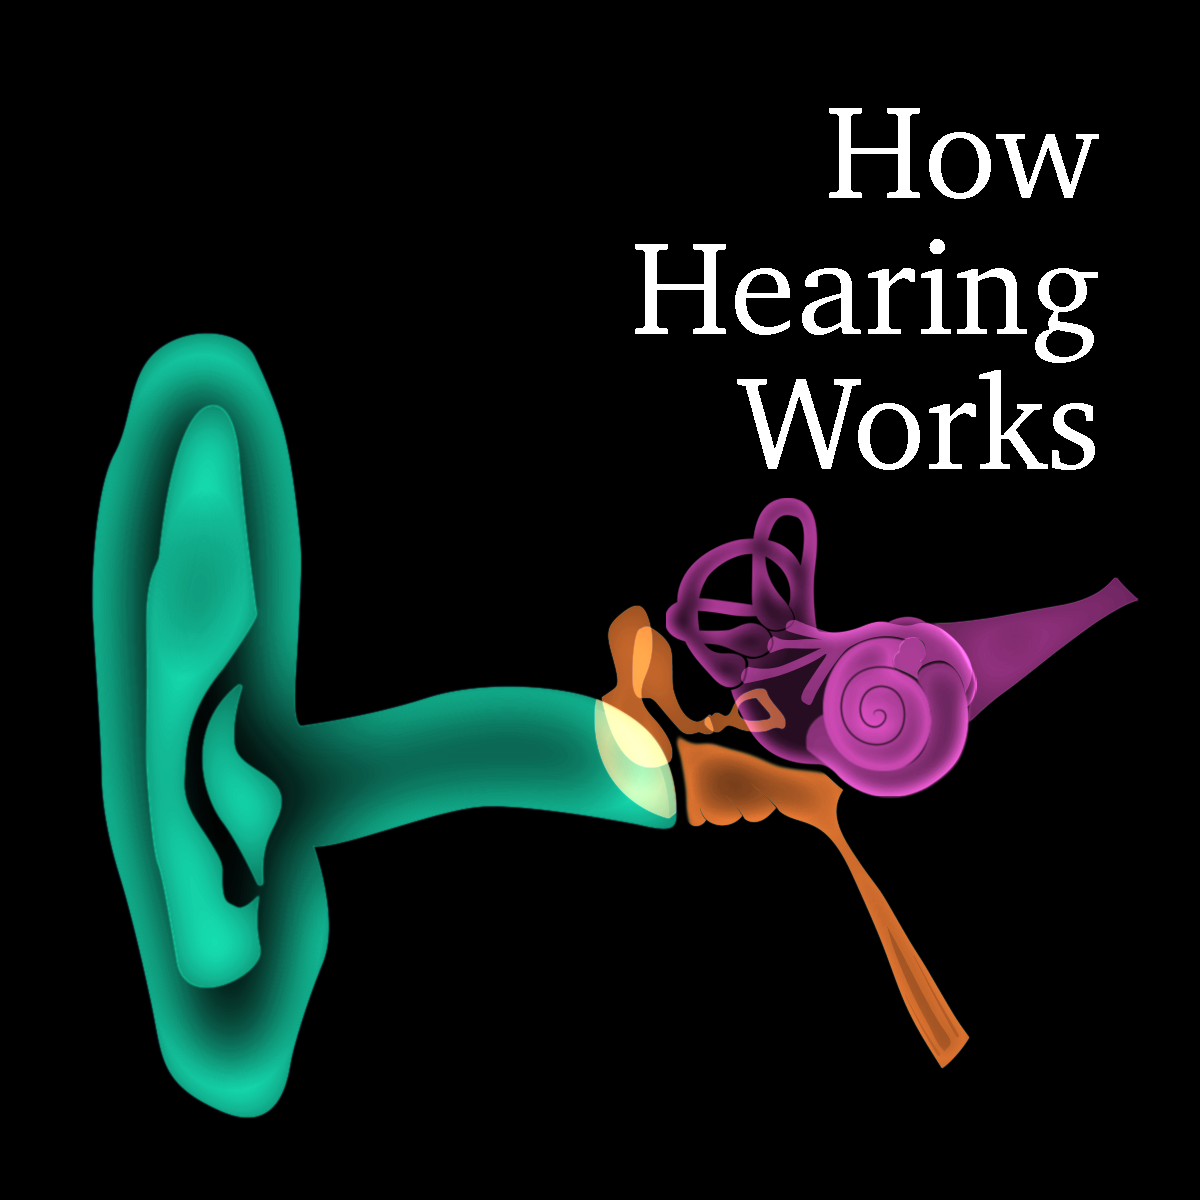 Illustration of the outer and inner ear with text that reads "How Hearing Works"